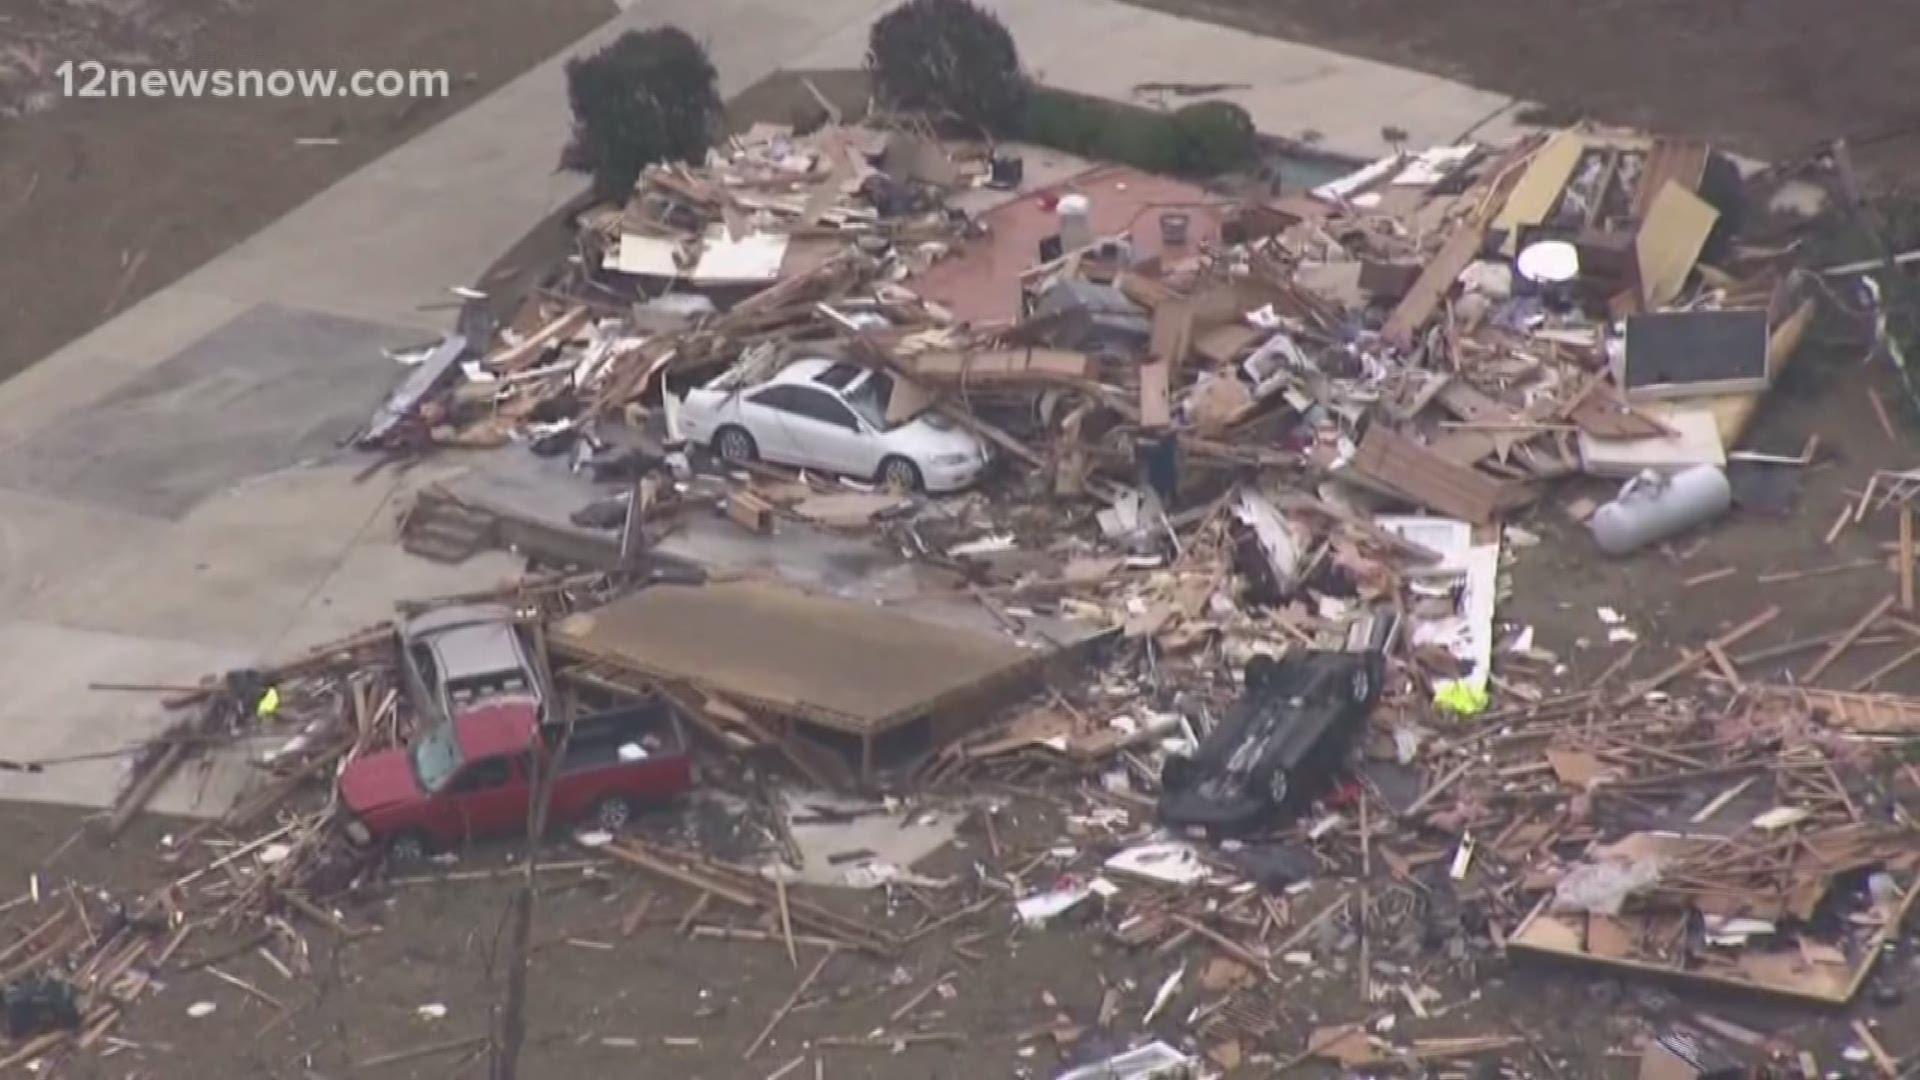 Search and recovery efforts continue in Alabama following the deadly tornadoes.